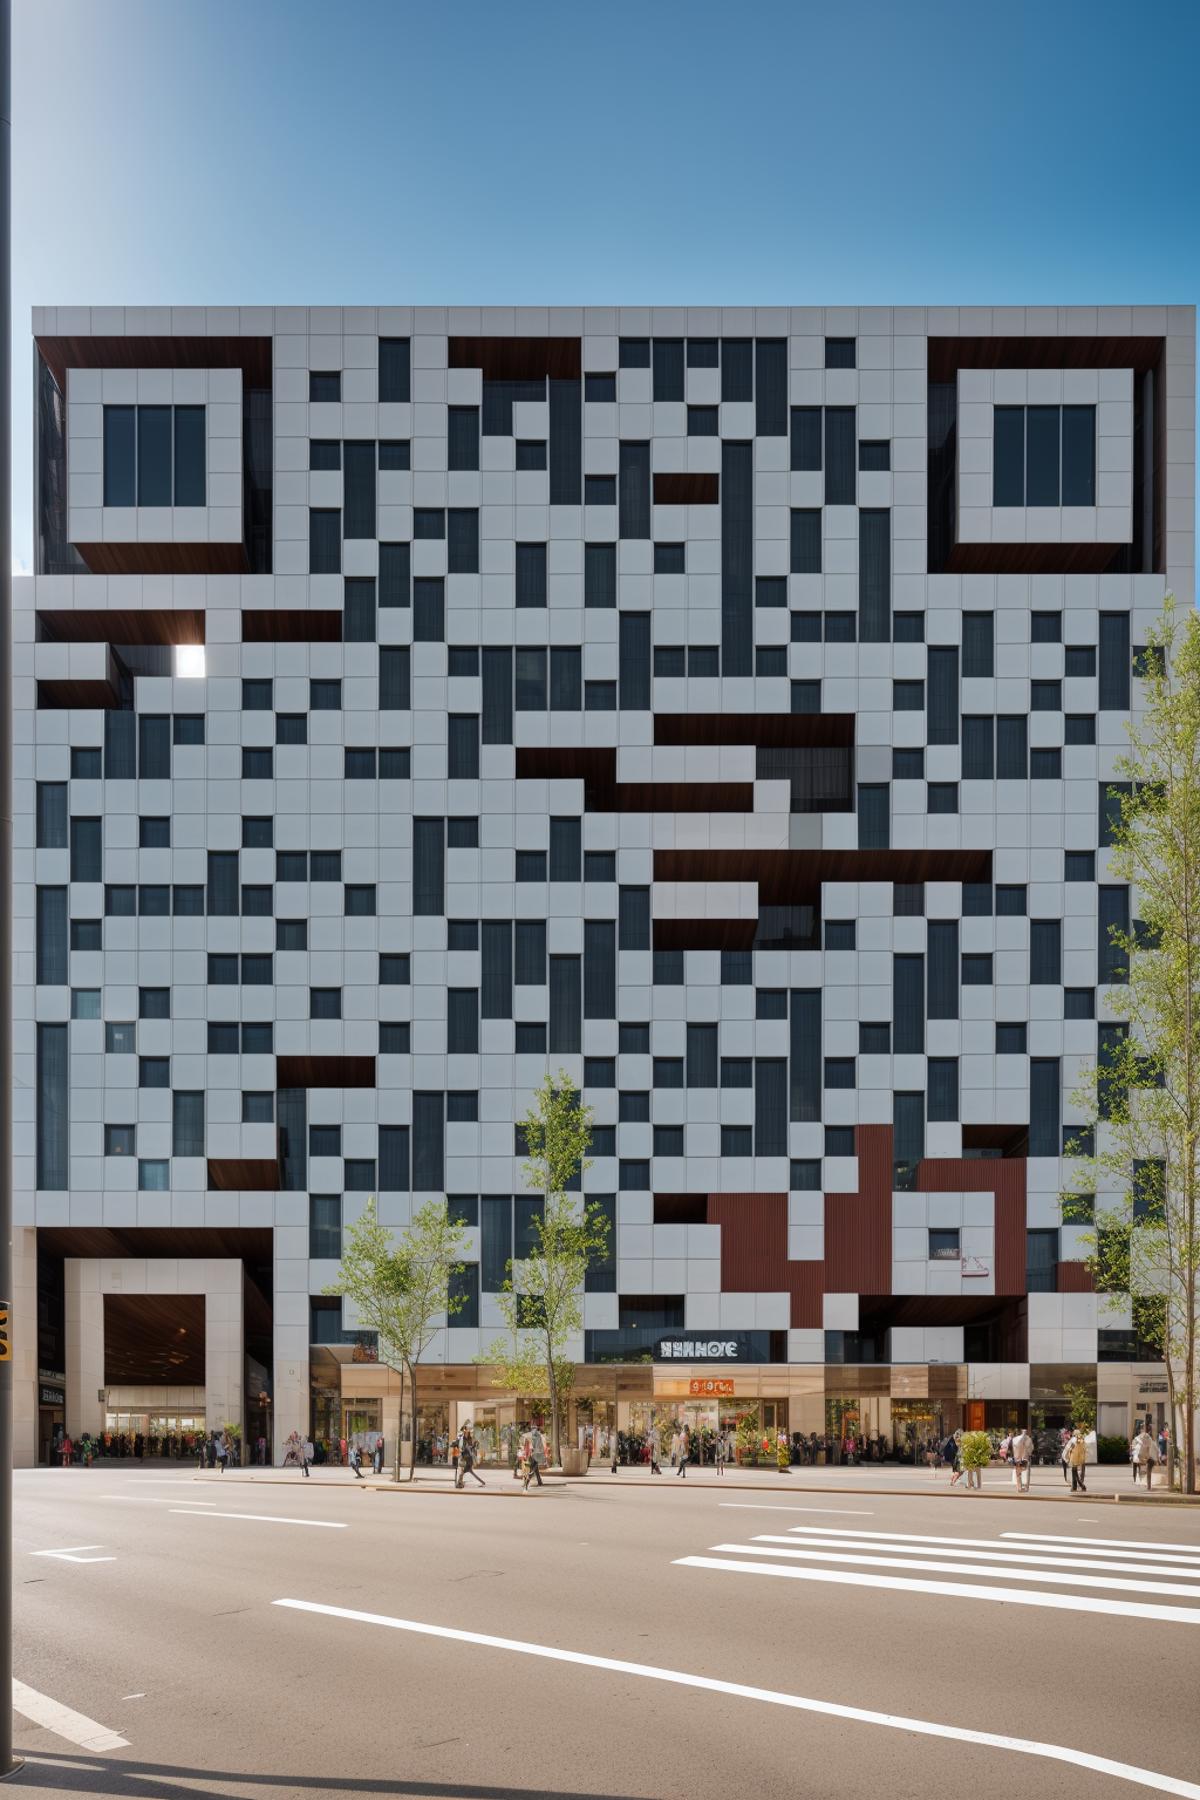 A busy city street with a large building featuring a QR code on its side.